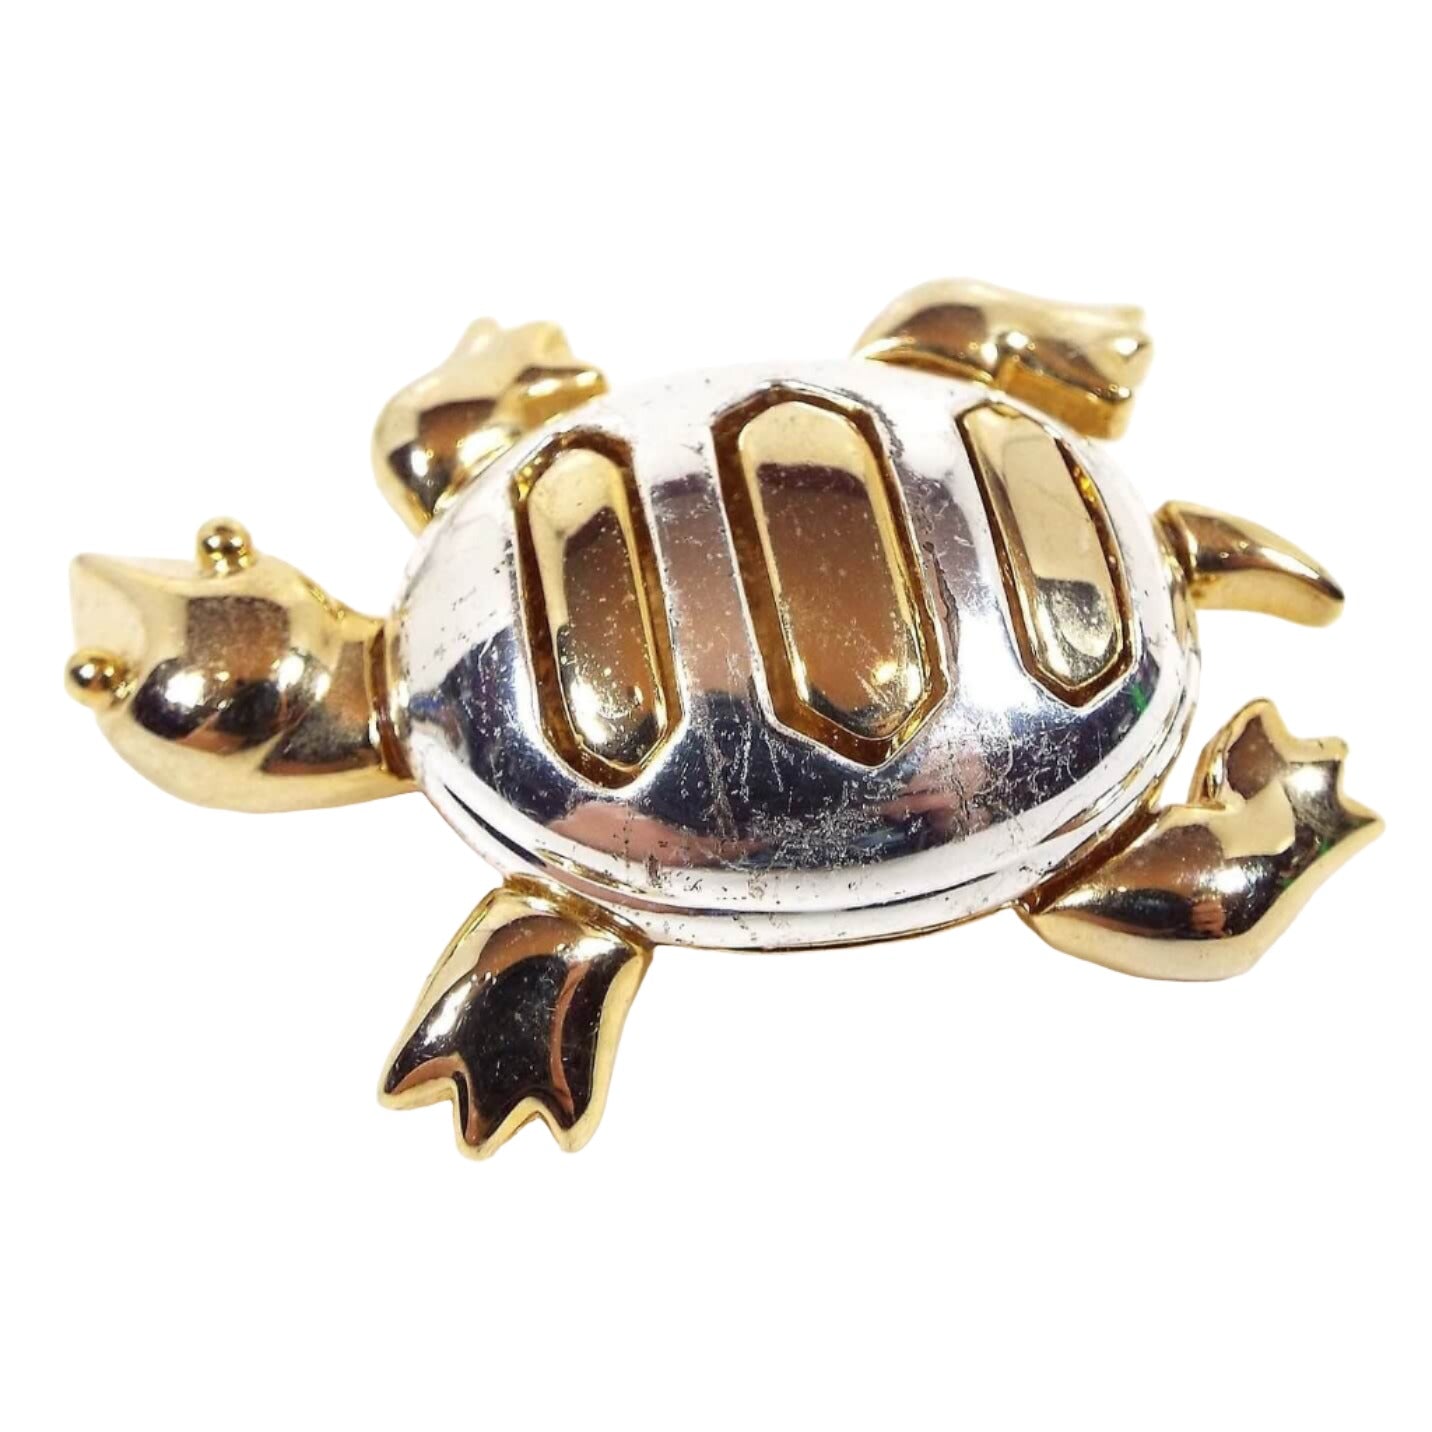 Top view of the Allison Reed retro vintage turtle brooch pin. The turtle appears to be on the move with his legs bent and his head turned to the right. His head, legs, tail, and stripes on top are gold tone in color and his shell is silver tone in color.